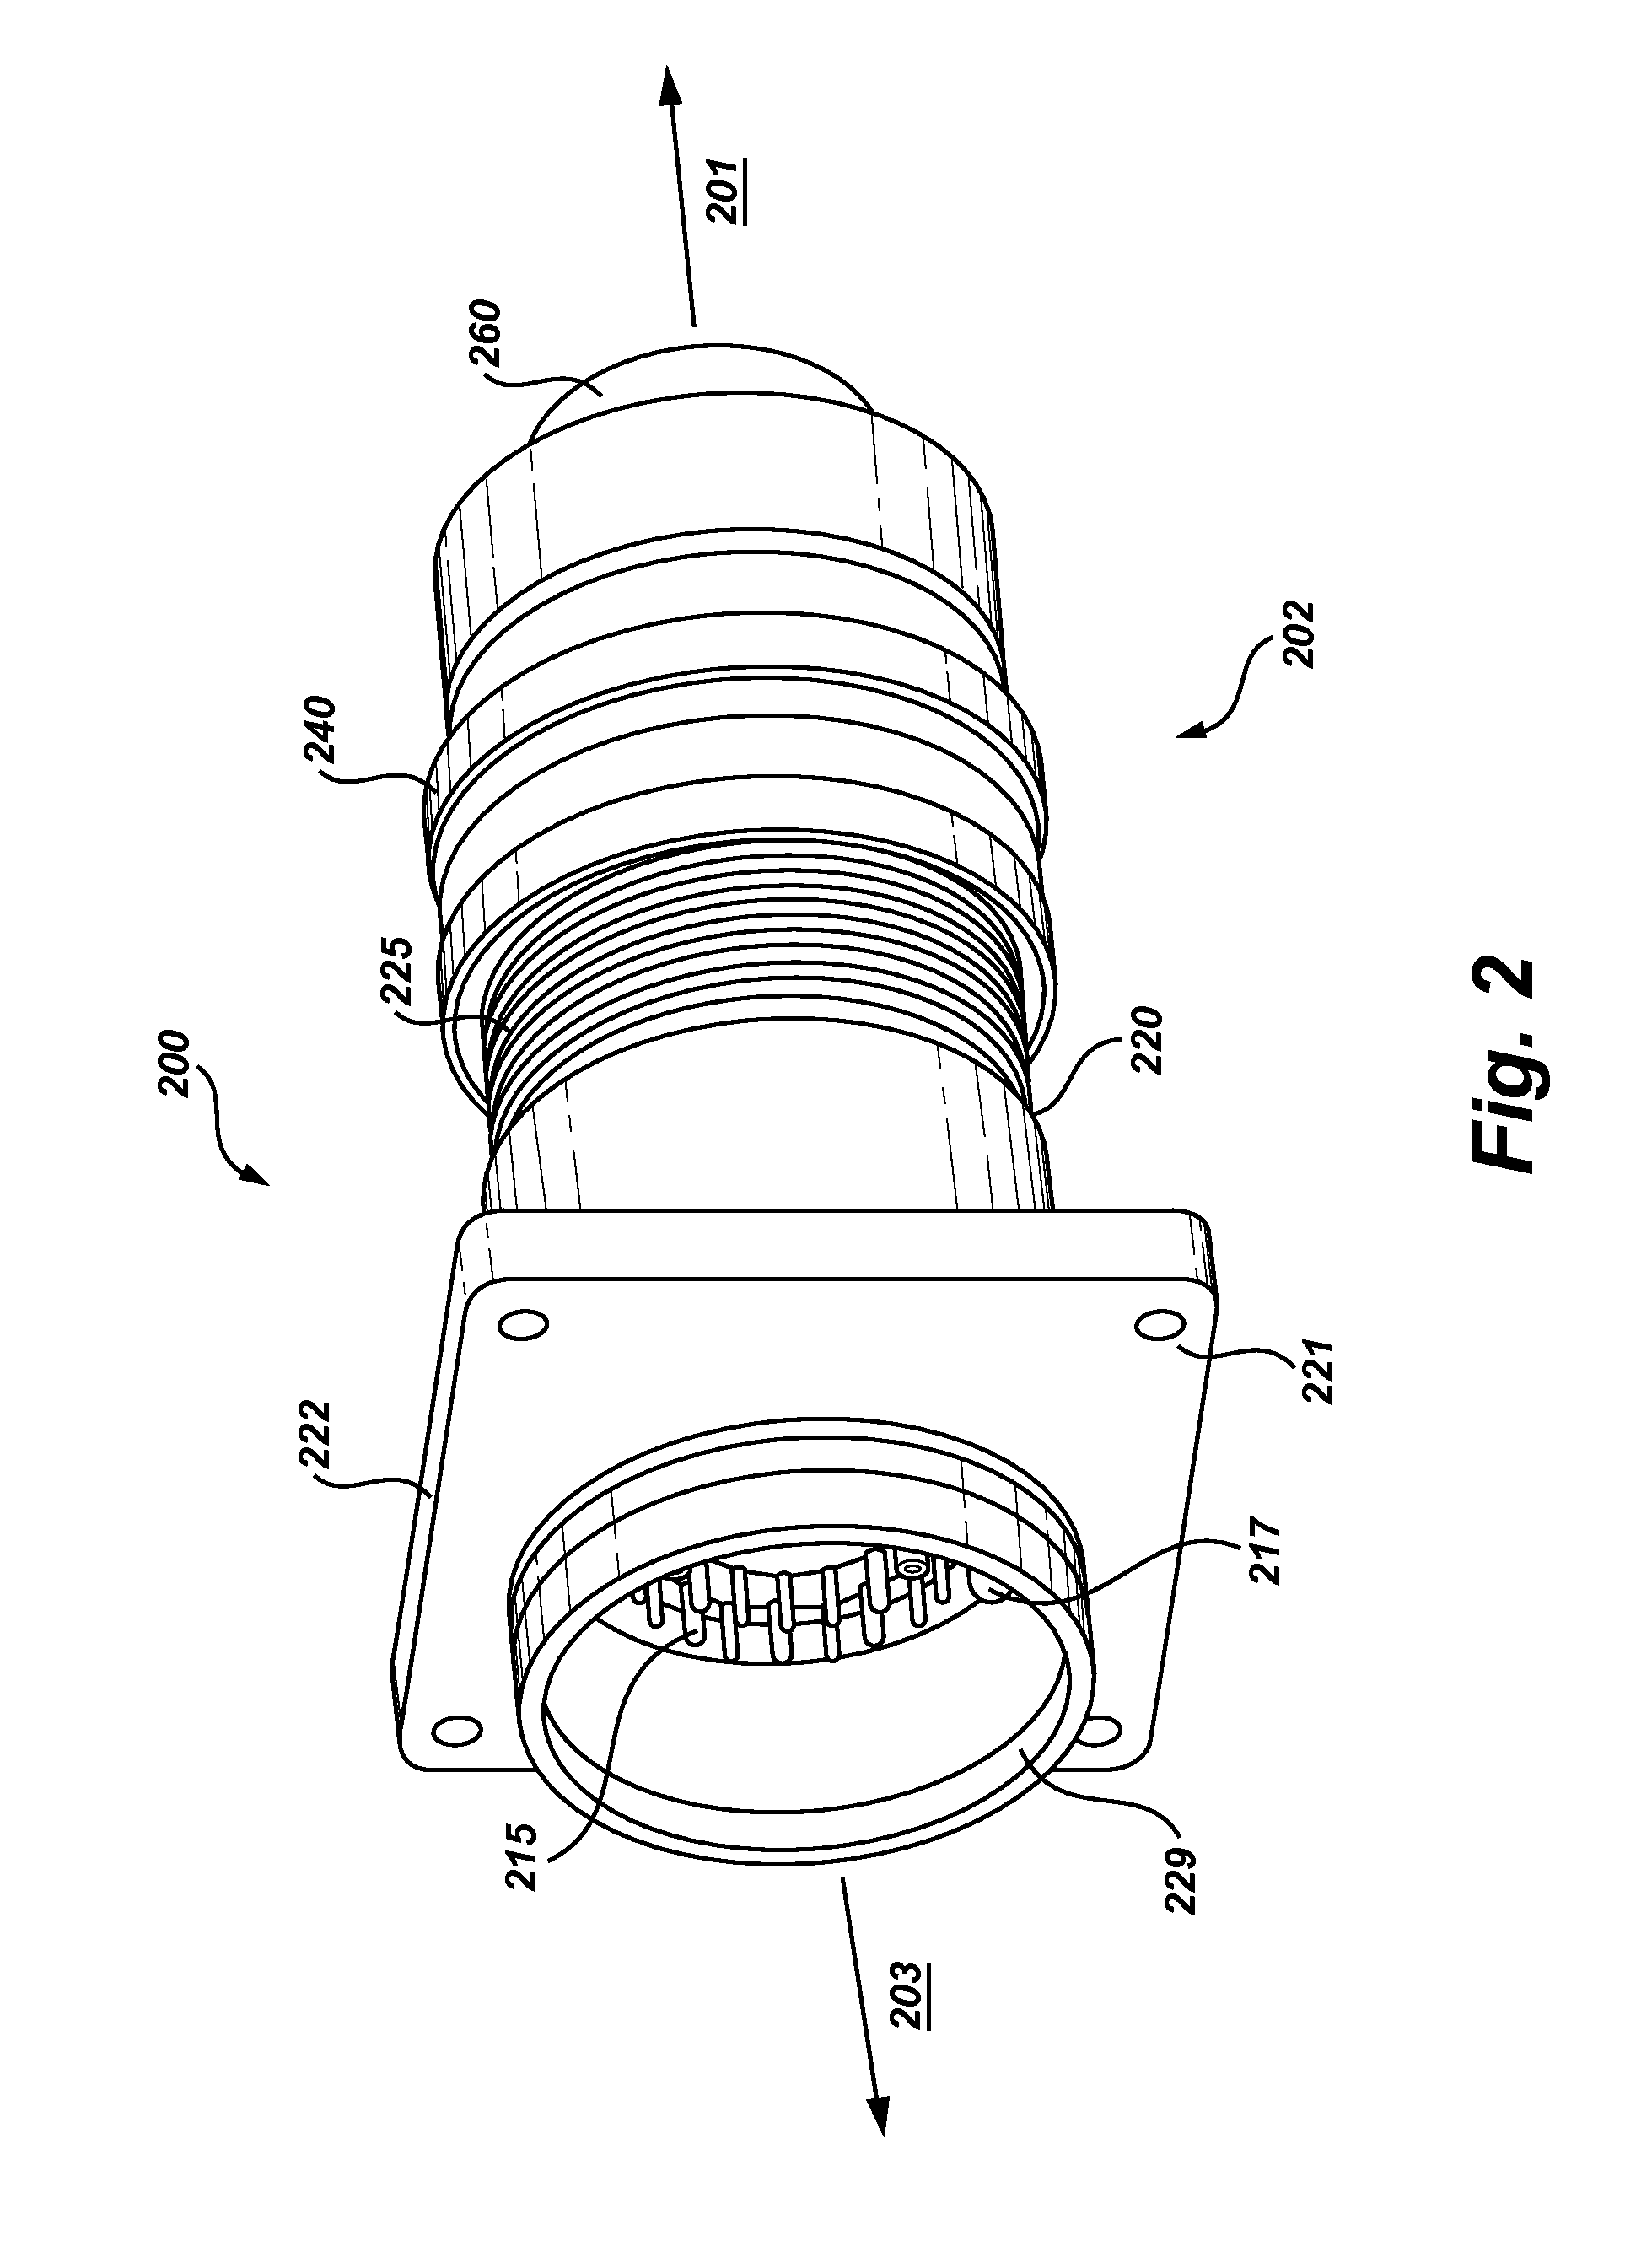 Electrical connector with anchor mount